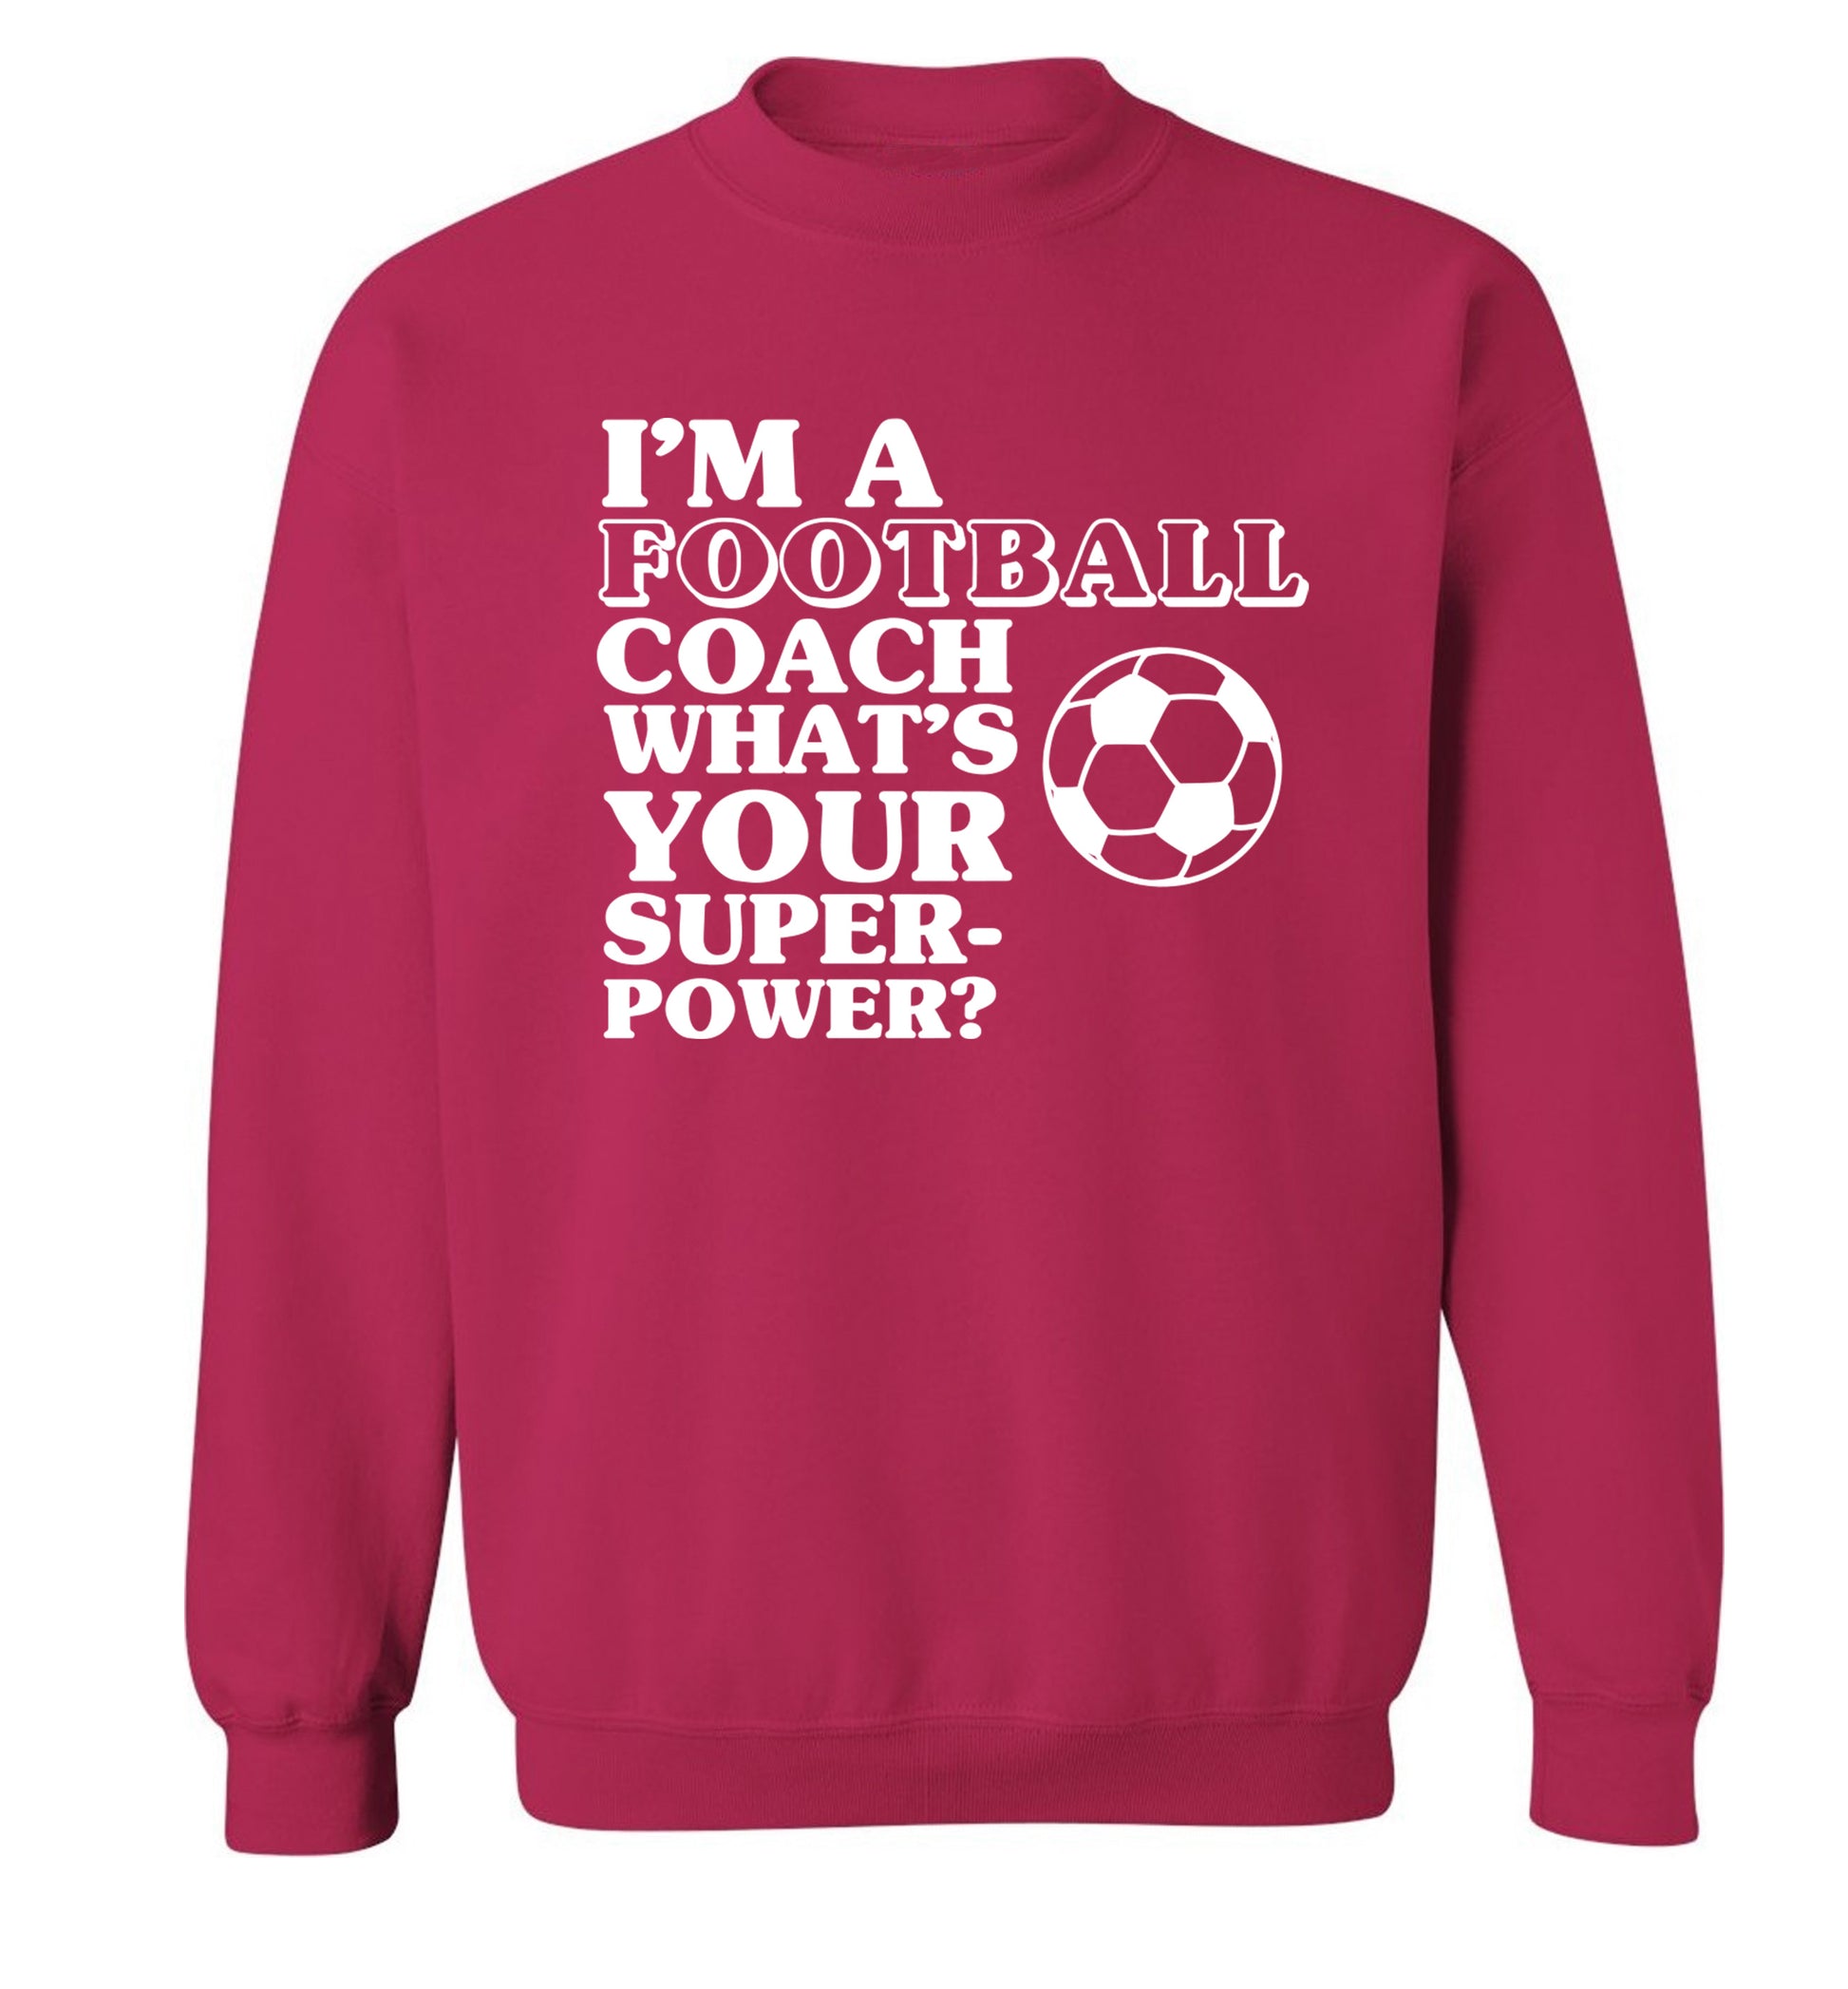 I'm a football coach what's your superpower? Adult's unisexpink Sweater 2XL